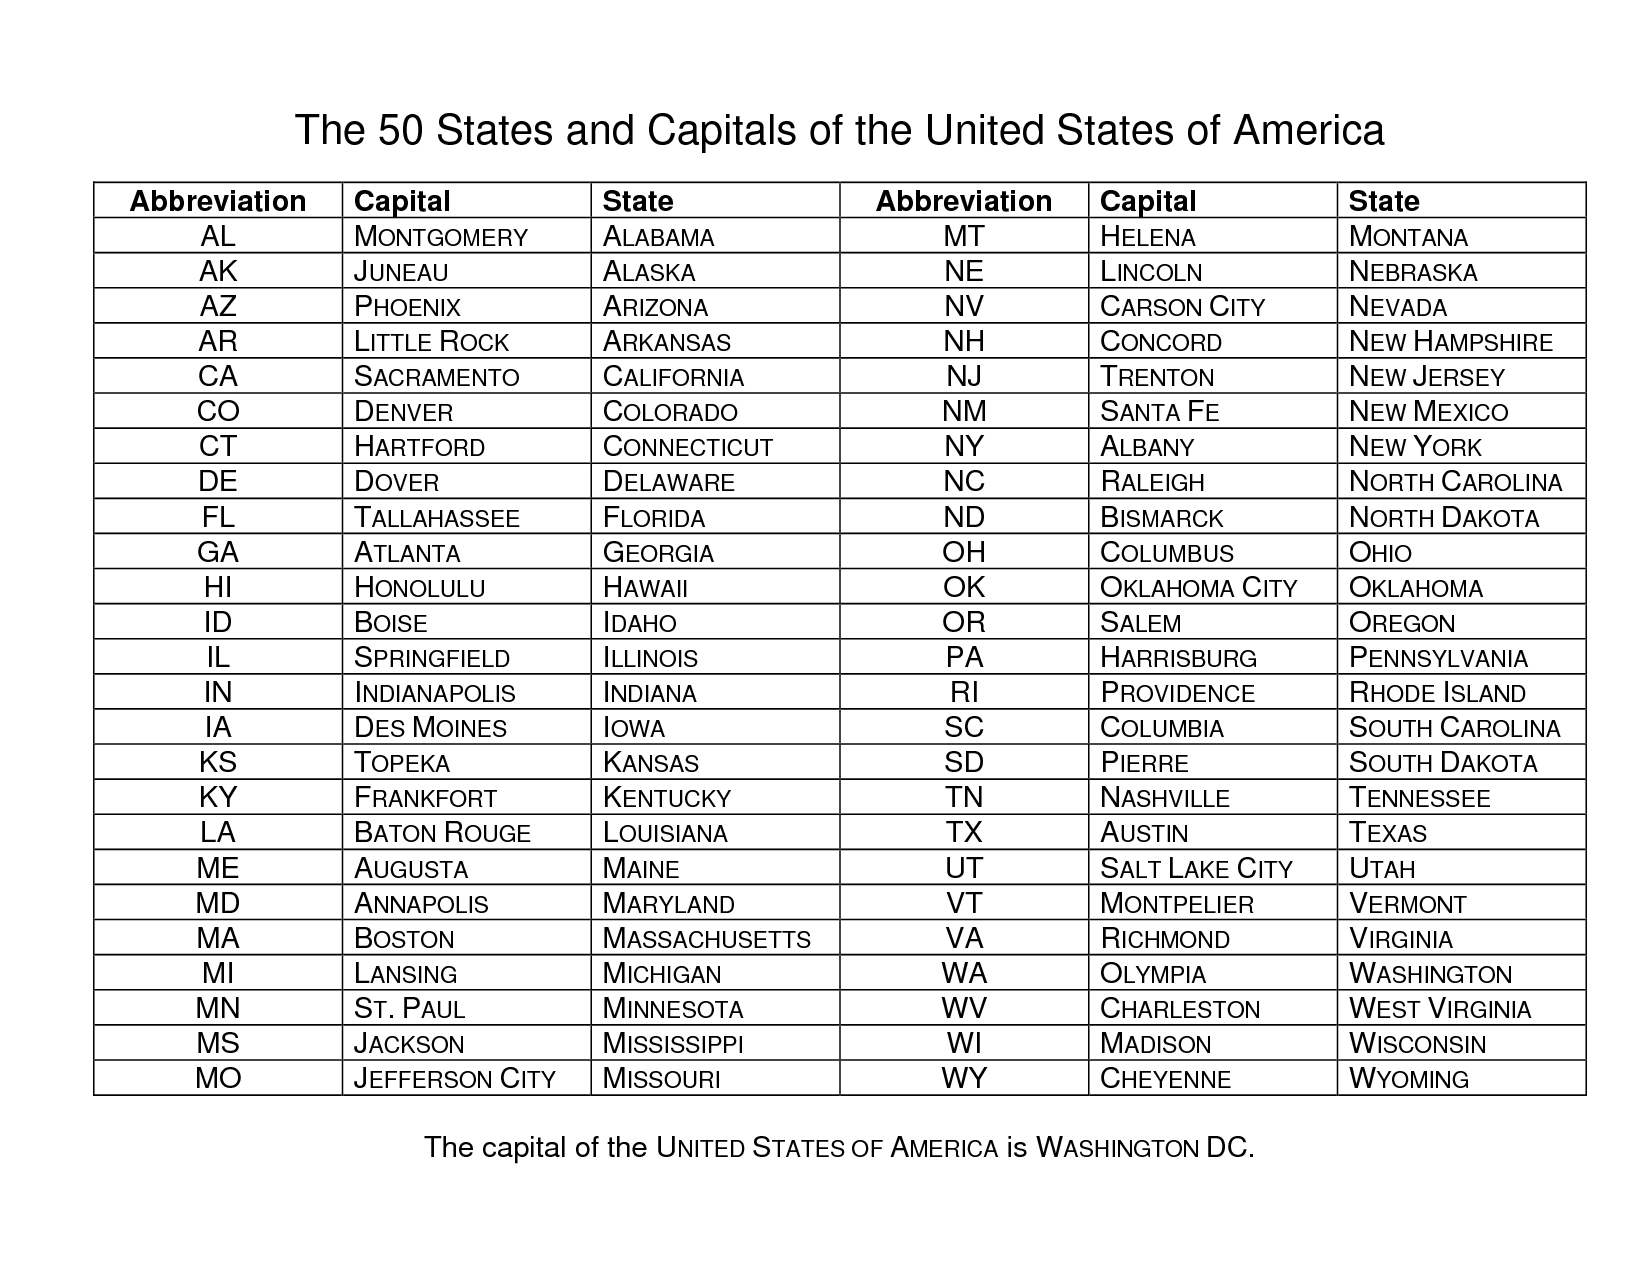 List All 50 States and Capitals